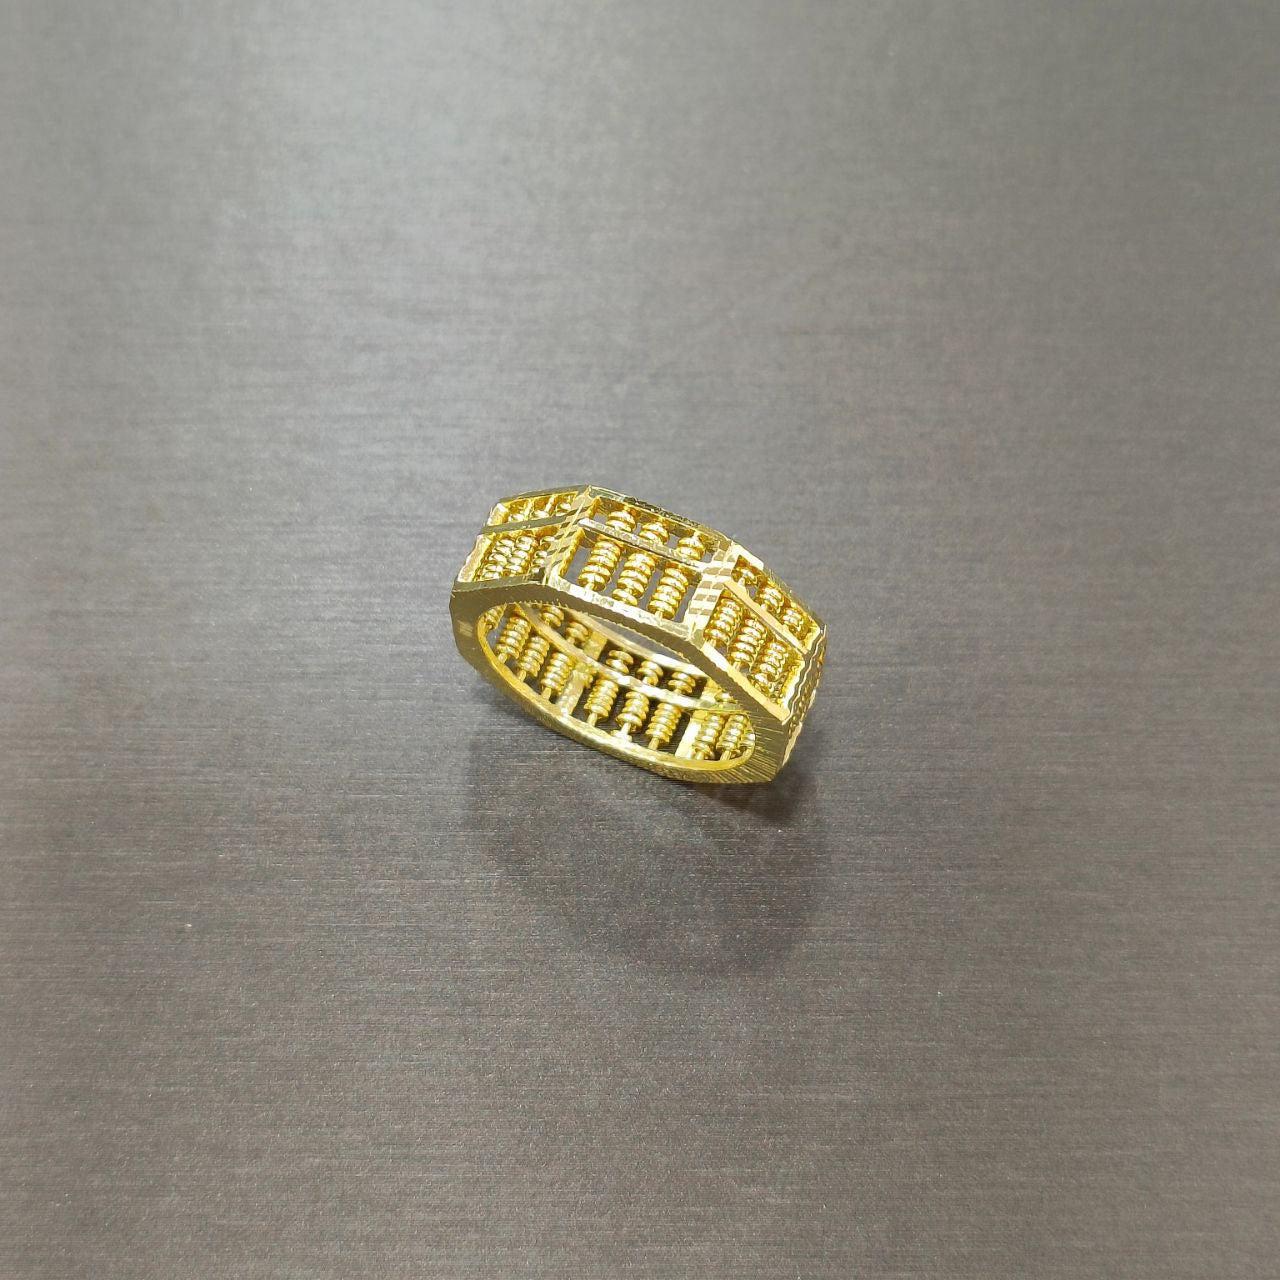 22k / 916 Gold Full Wide Octagon Abacus Ring by Best Gold Shop-916 gold-Best Gold Shop